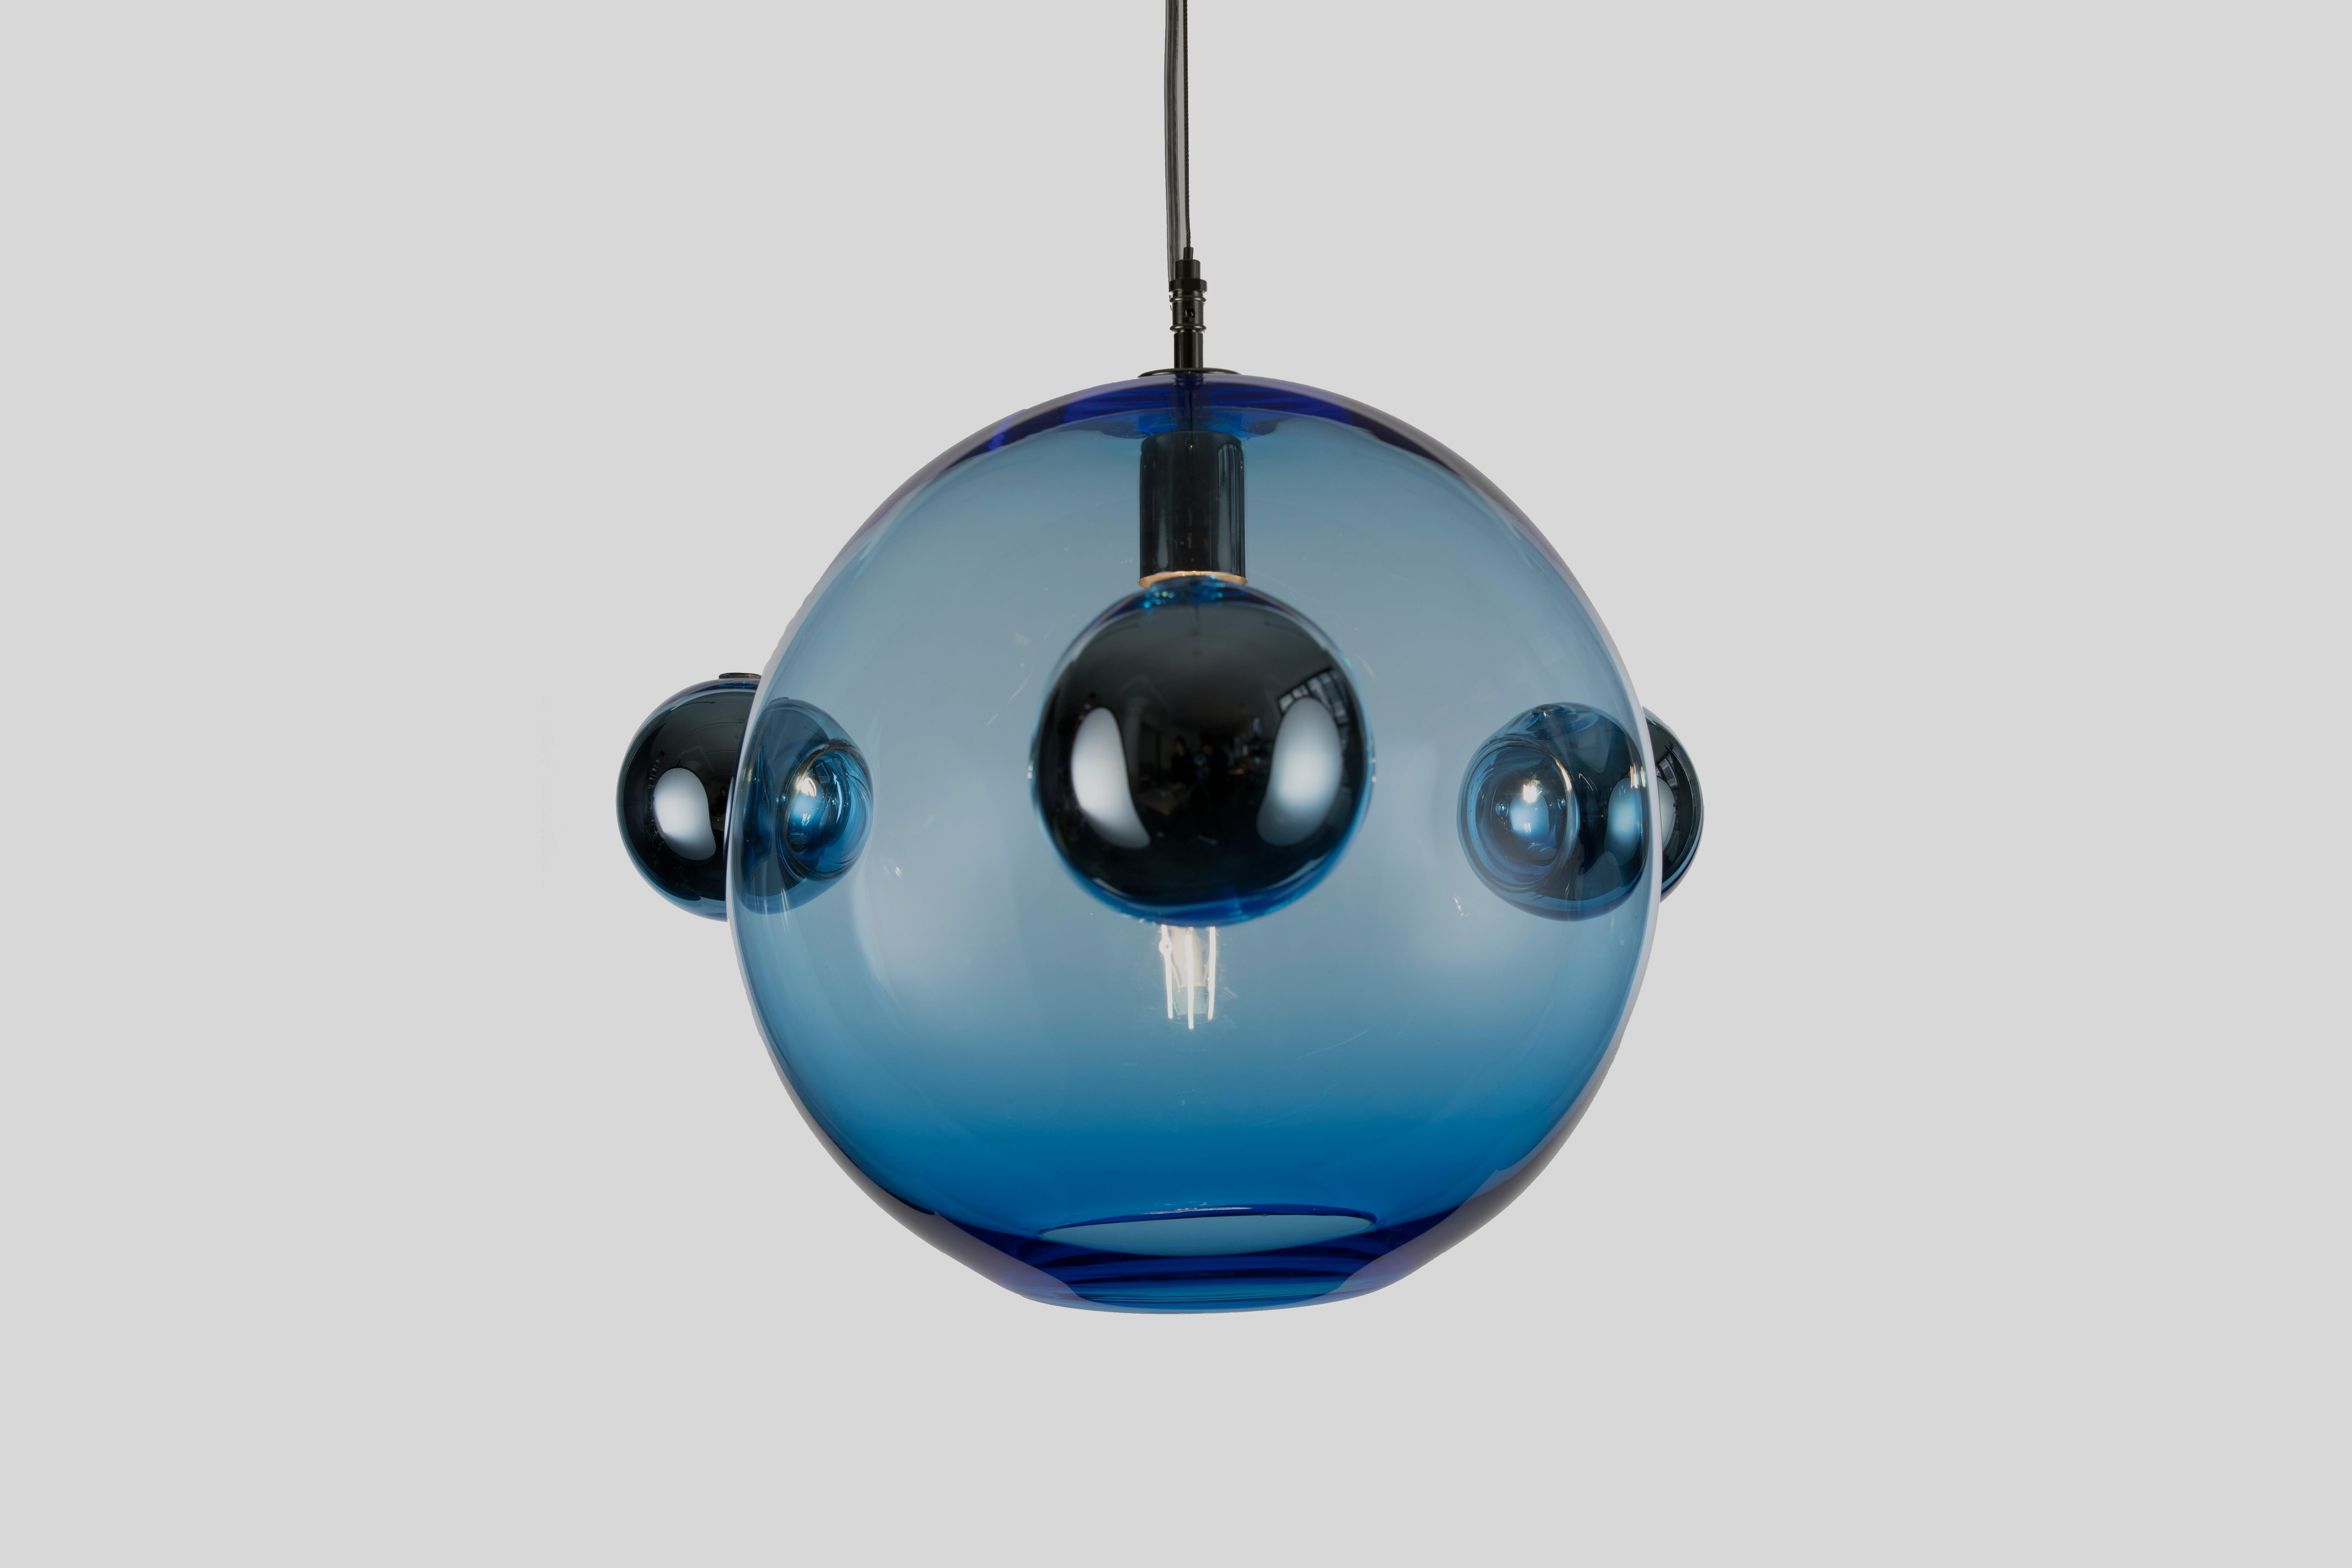 The Molecule Pendant - Triple is a calculated arrangements of handblown glass orbs meant to resemble simple molecular structures. It consists of a 14